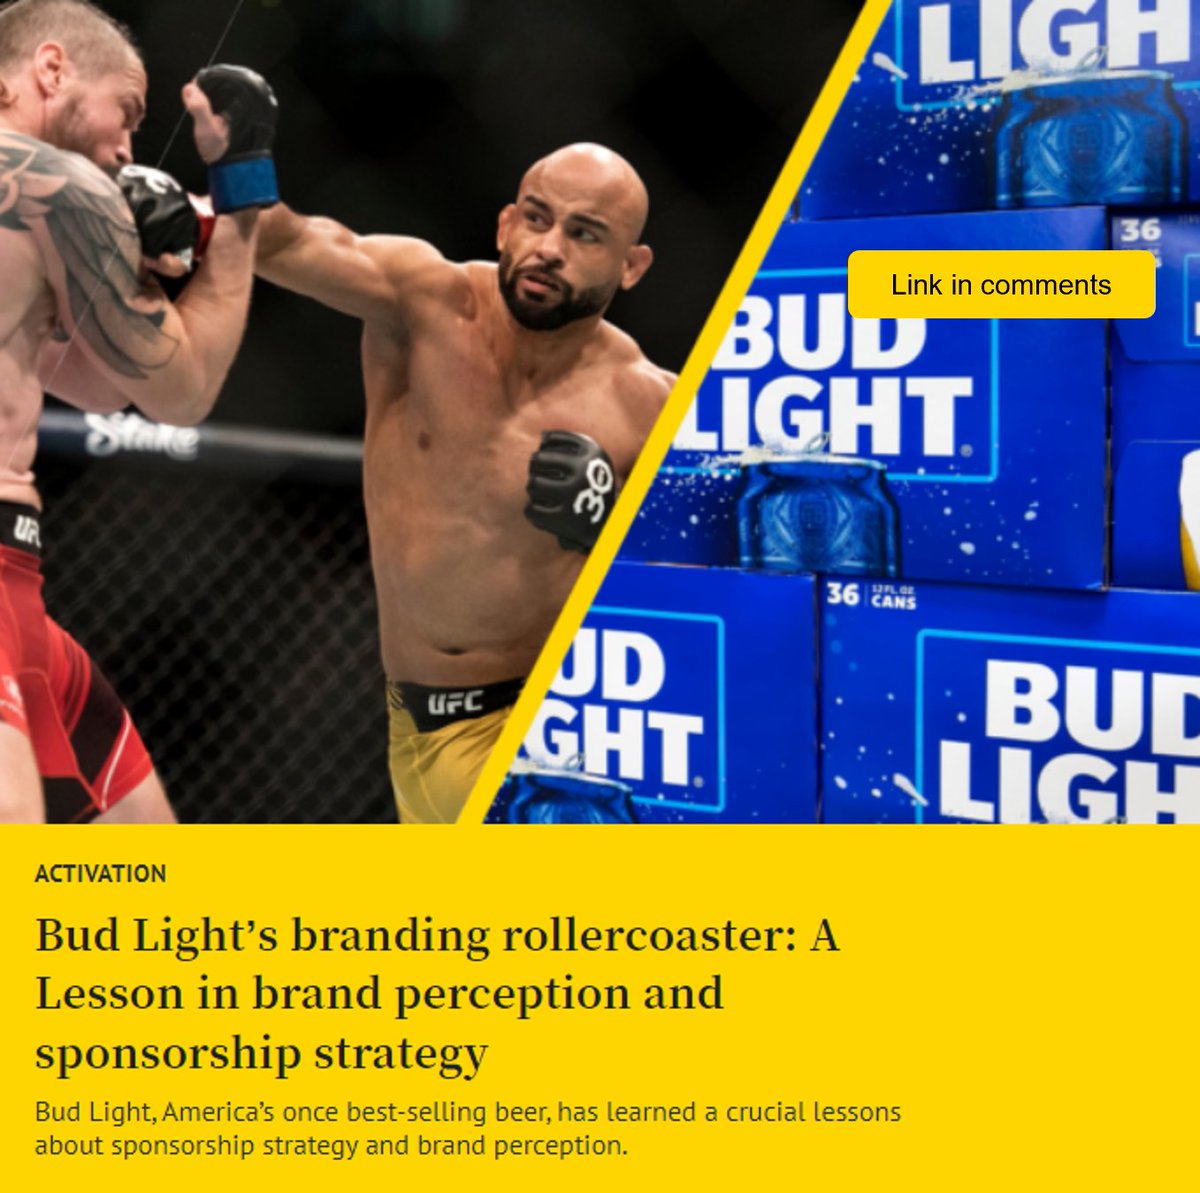 After a disastrous partnership with trans-activist Dylan Mulvaney, Bud Light has turned to the UFC in a $100m sponsorship deal. 

thesponsor.com/bud-lights-bra…

#sponsorship #brandperception #ufcsponsorship #BudLight #ufc #PR #brandreputation #thesponsor